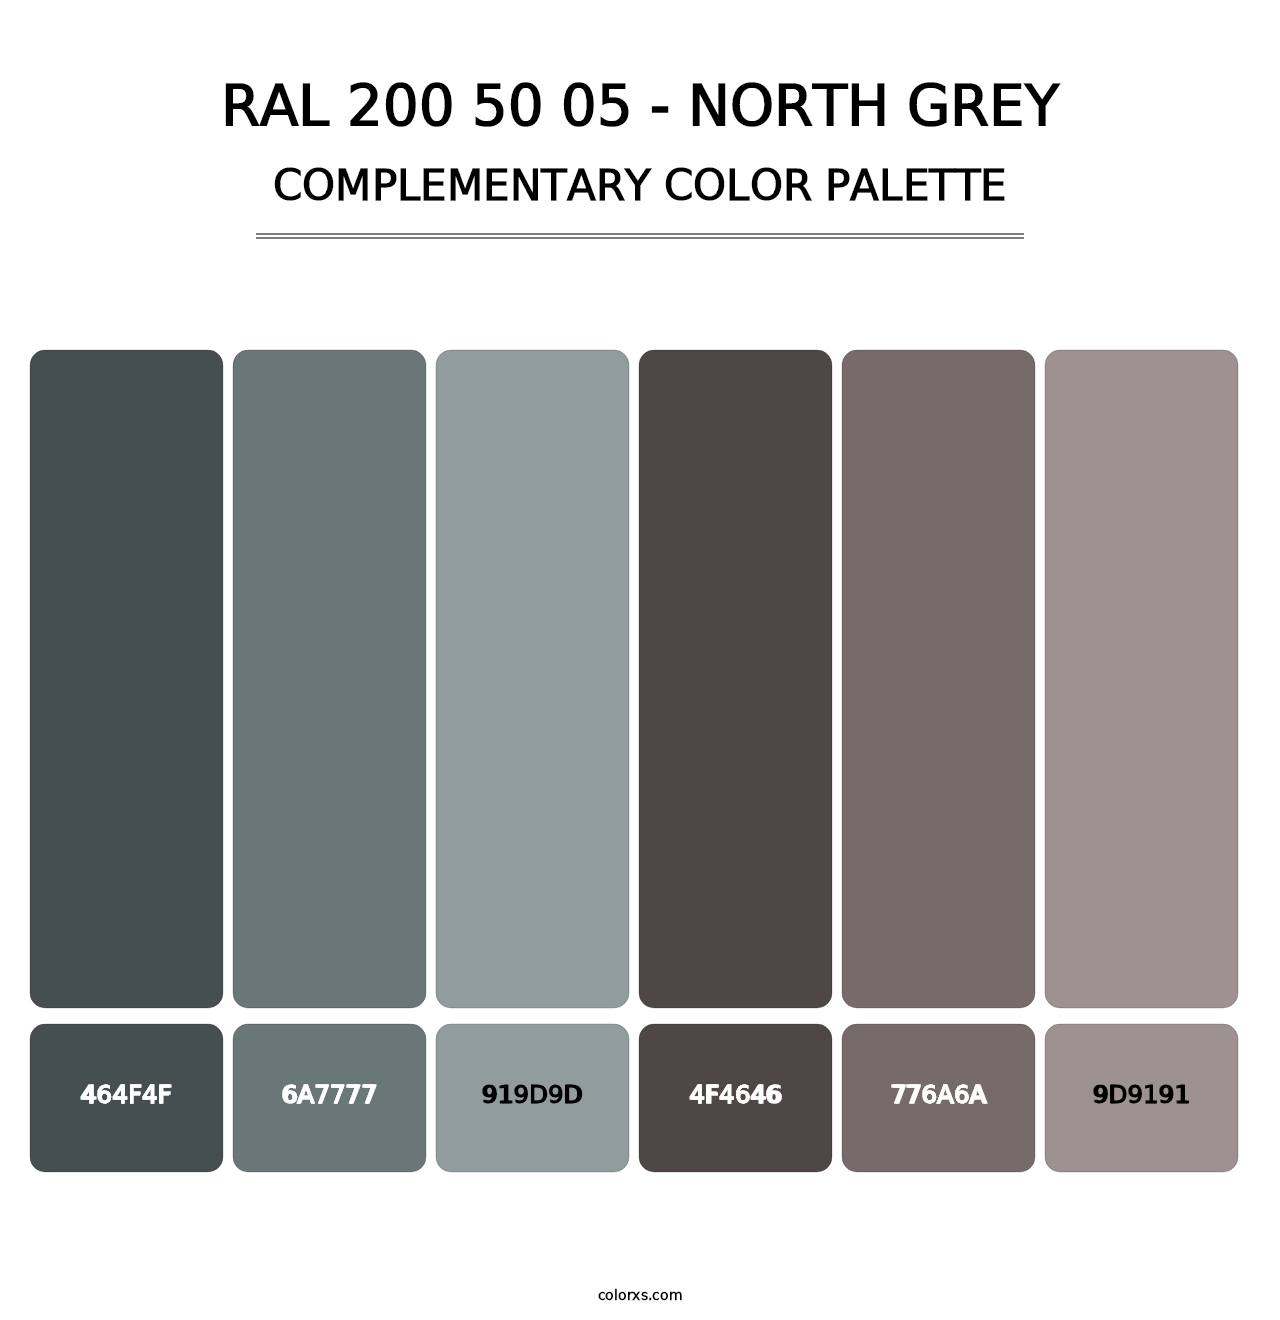 RAL 200 50 05 - North Grey - Complementary Color Palette